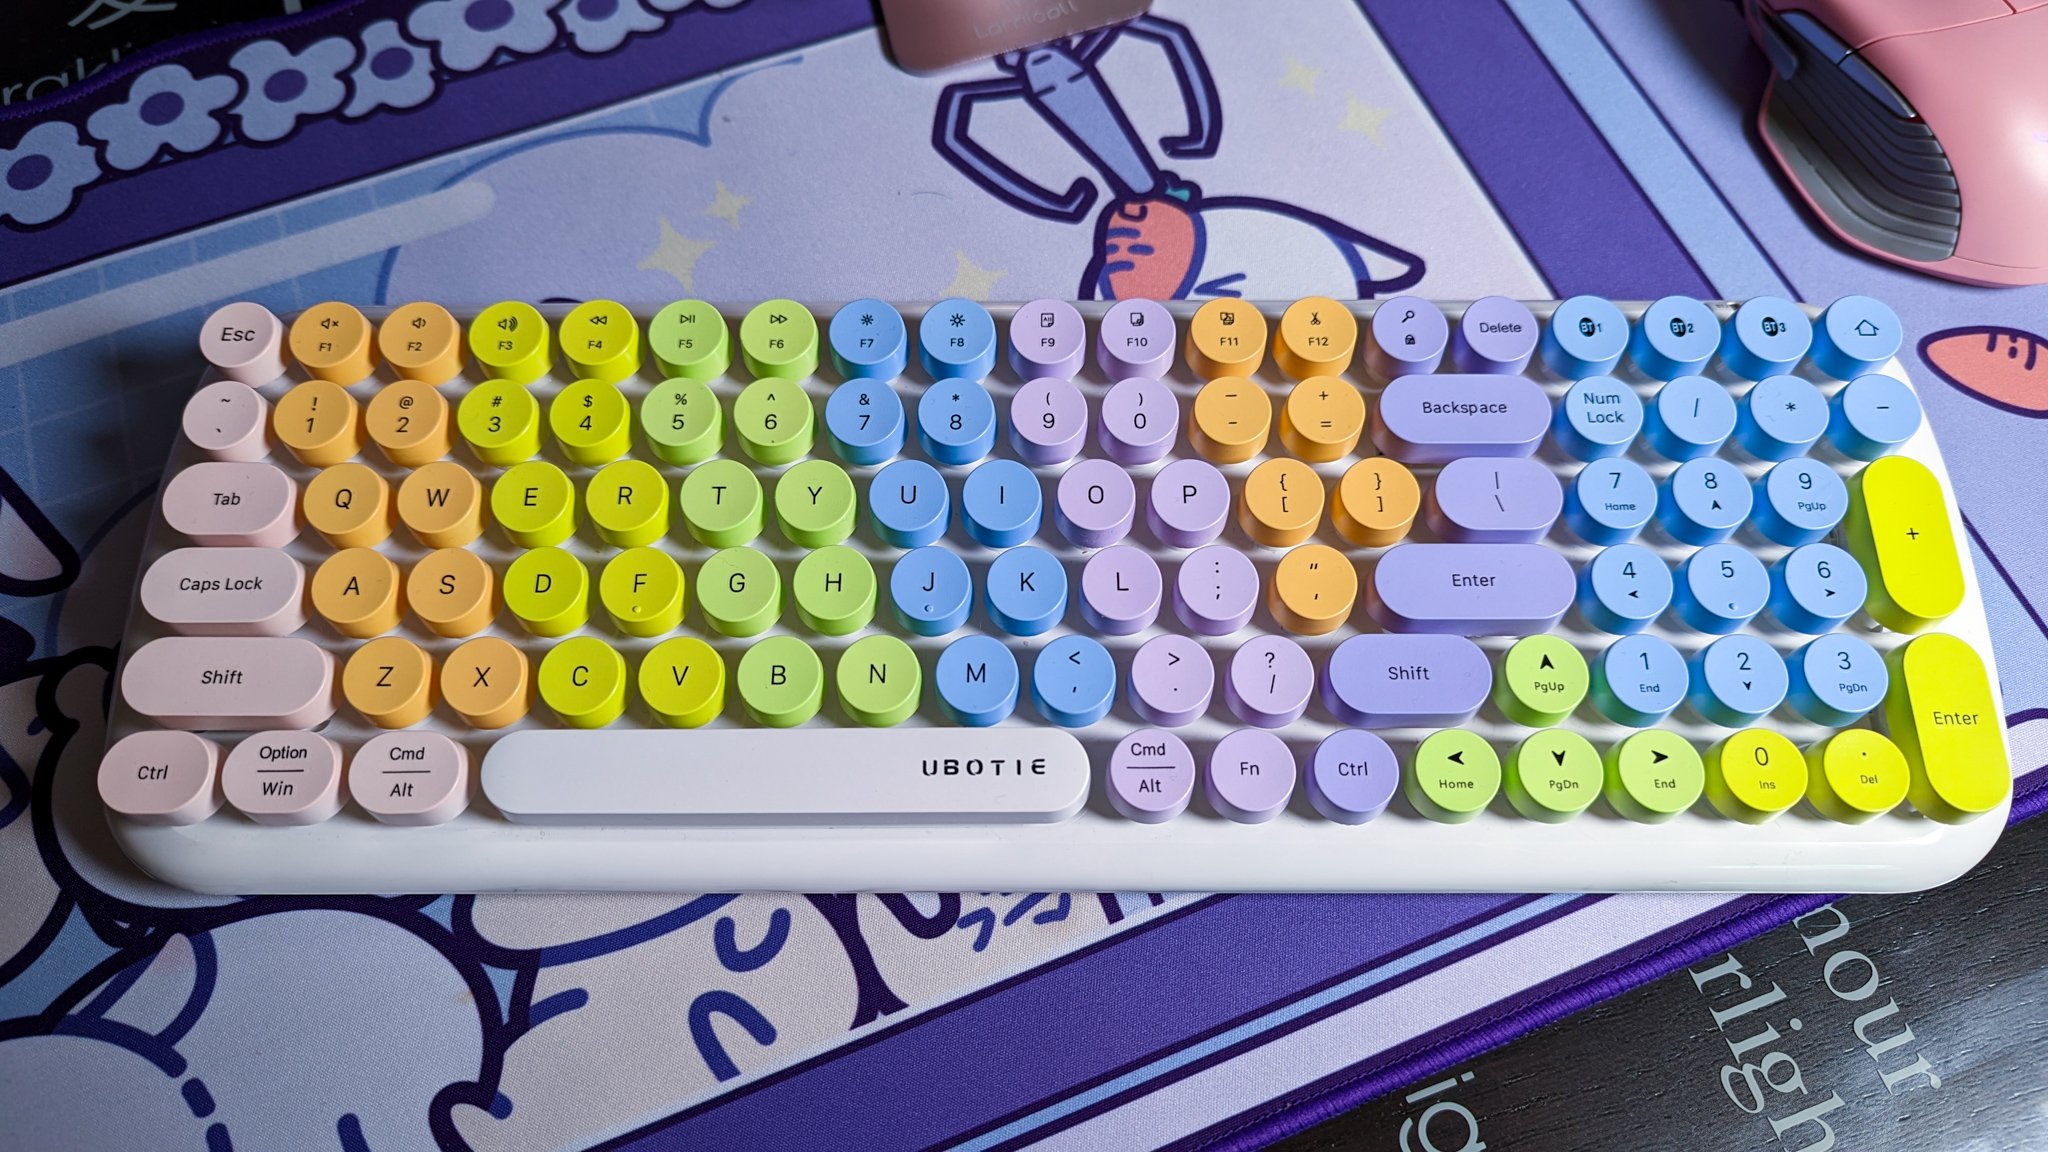 UBOTIE Bluetooth Keyboard Review: A Colorful “Ad”dition — Sypnotix